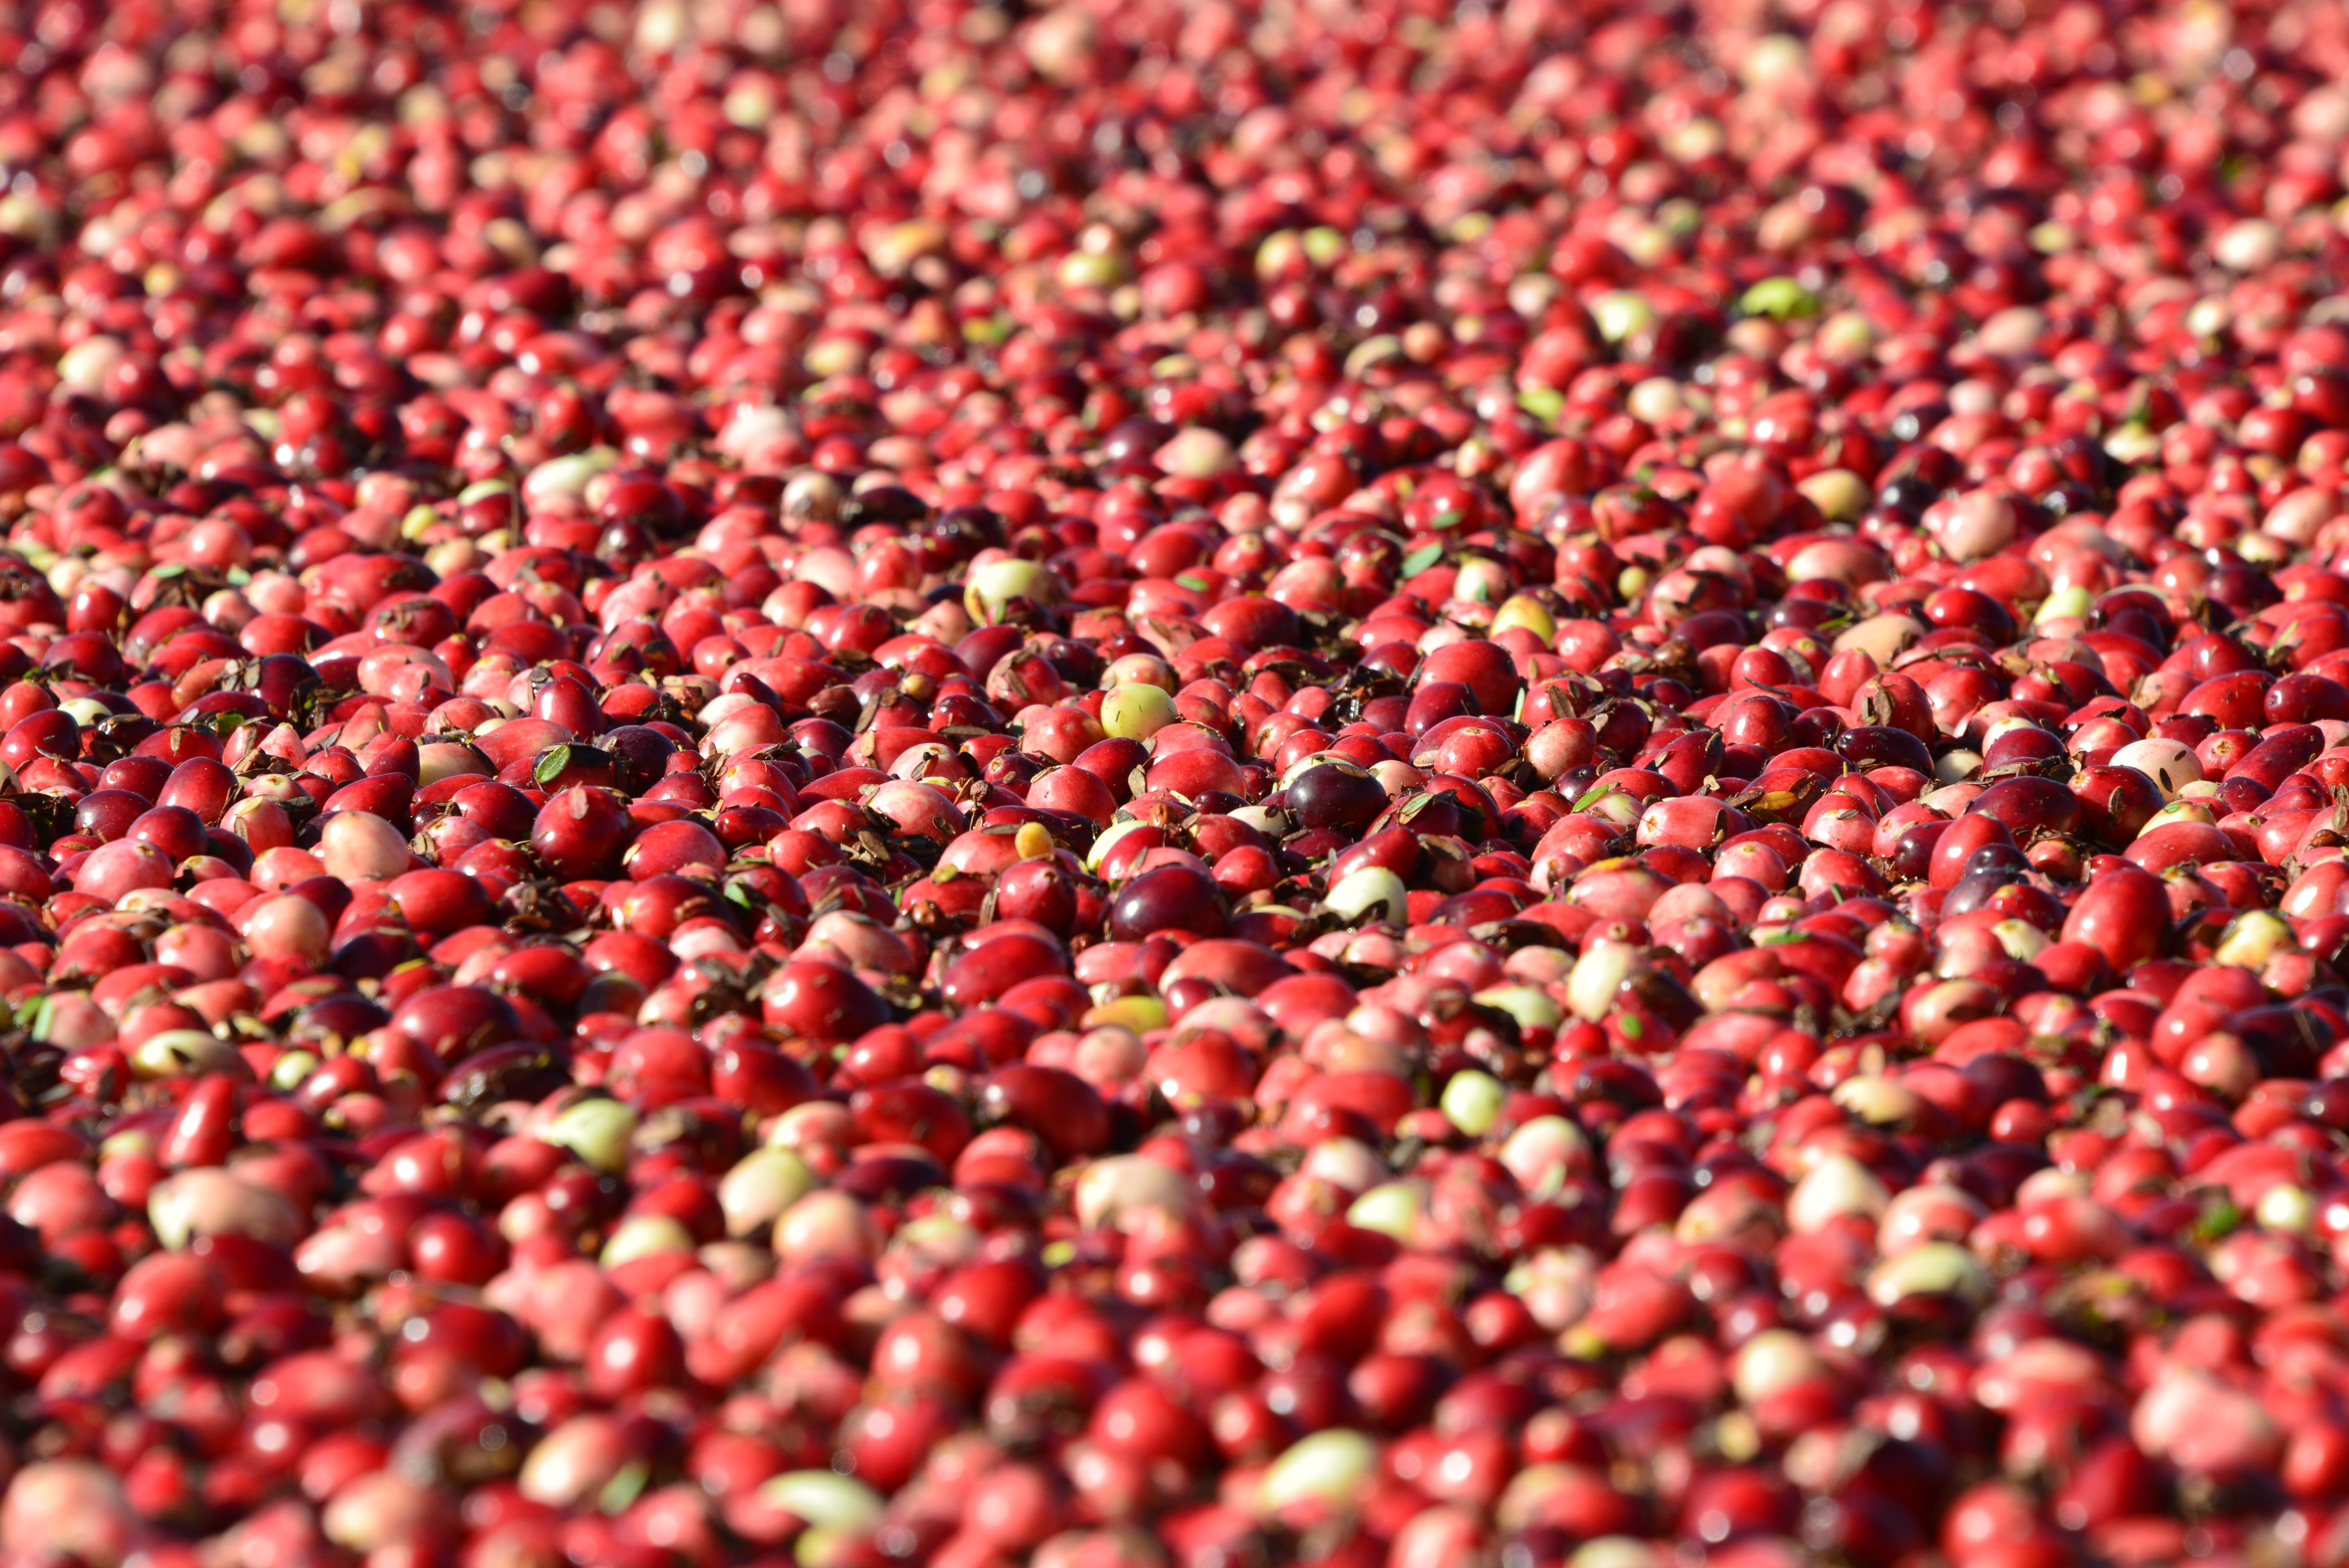 Wisconsin grows over 60 percent of the nation’s crop, making our state the top cranberry producing state in the nation.